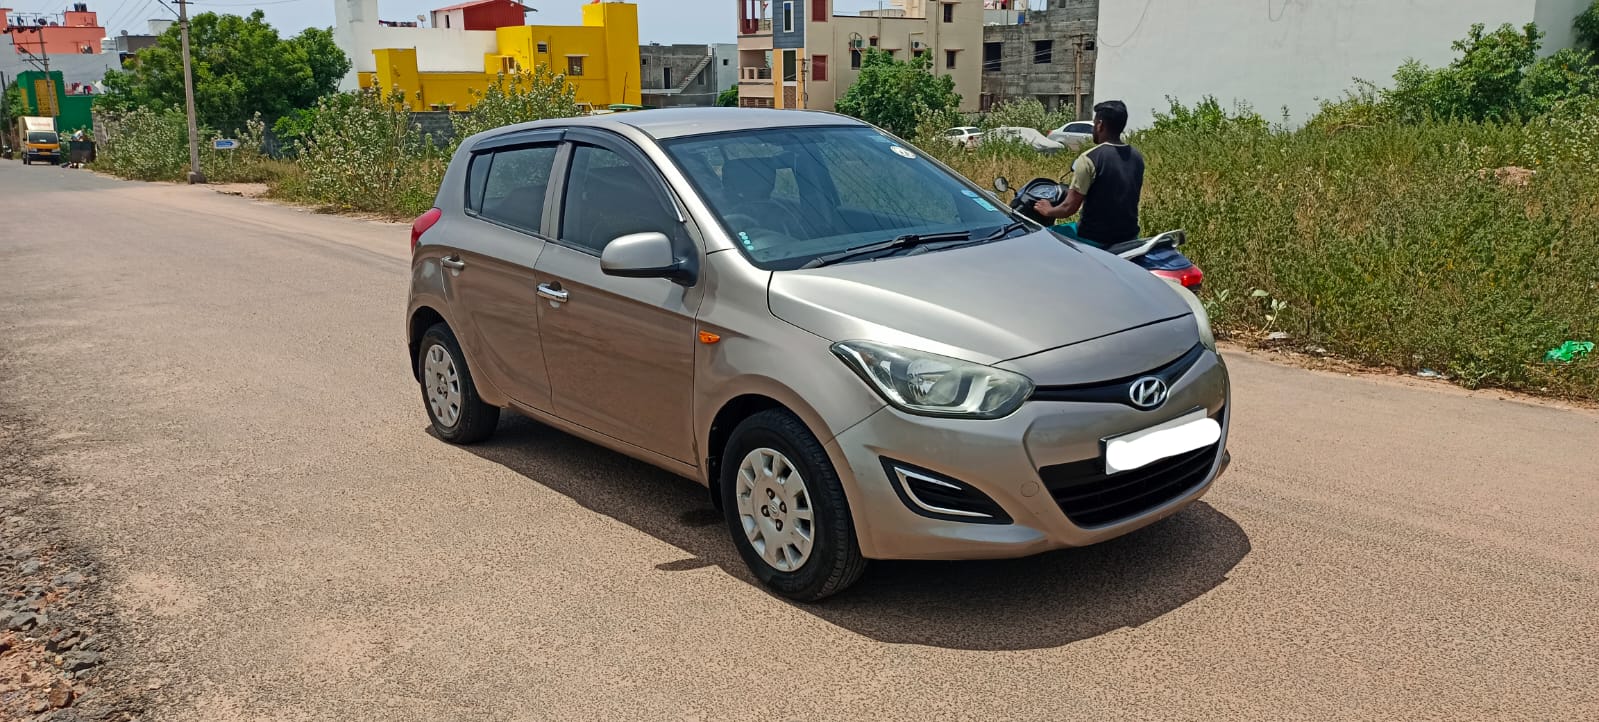 4293-for-sale-Hyundai-i20-Diesel-First-Owner-2013-PY-registered-rs-340000